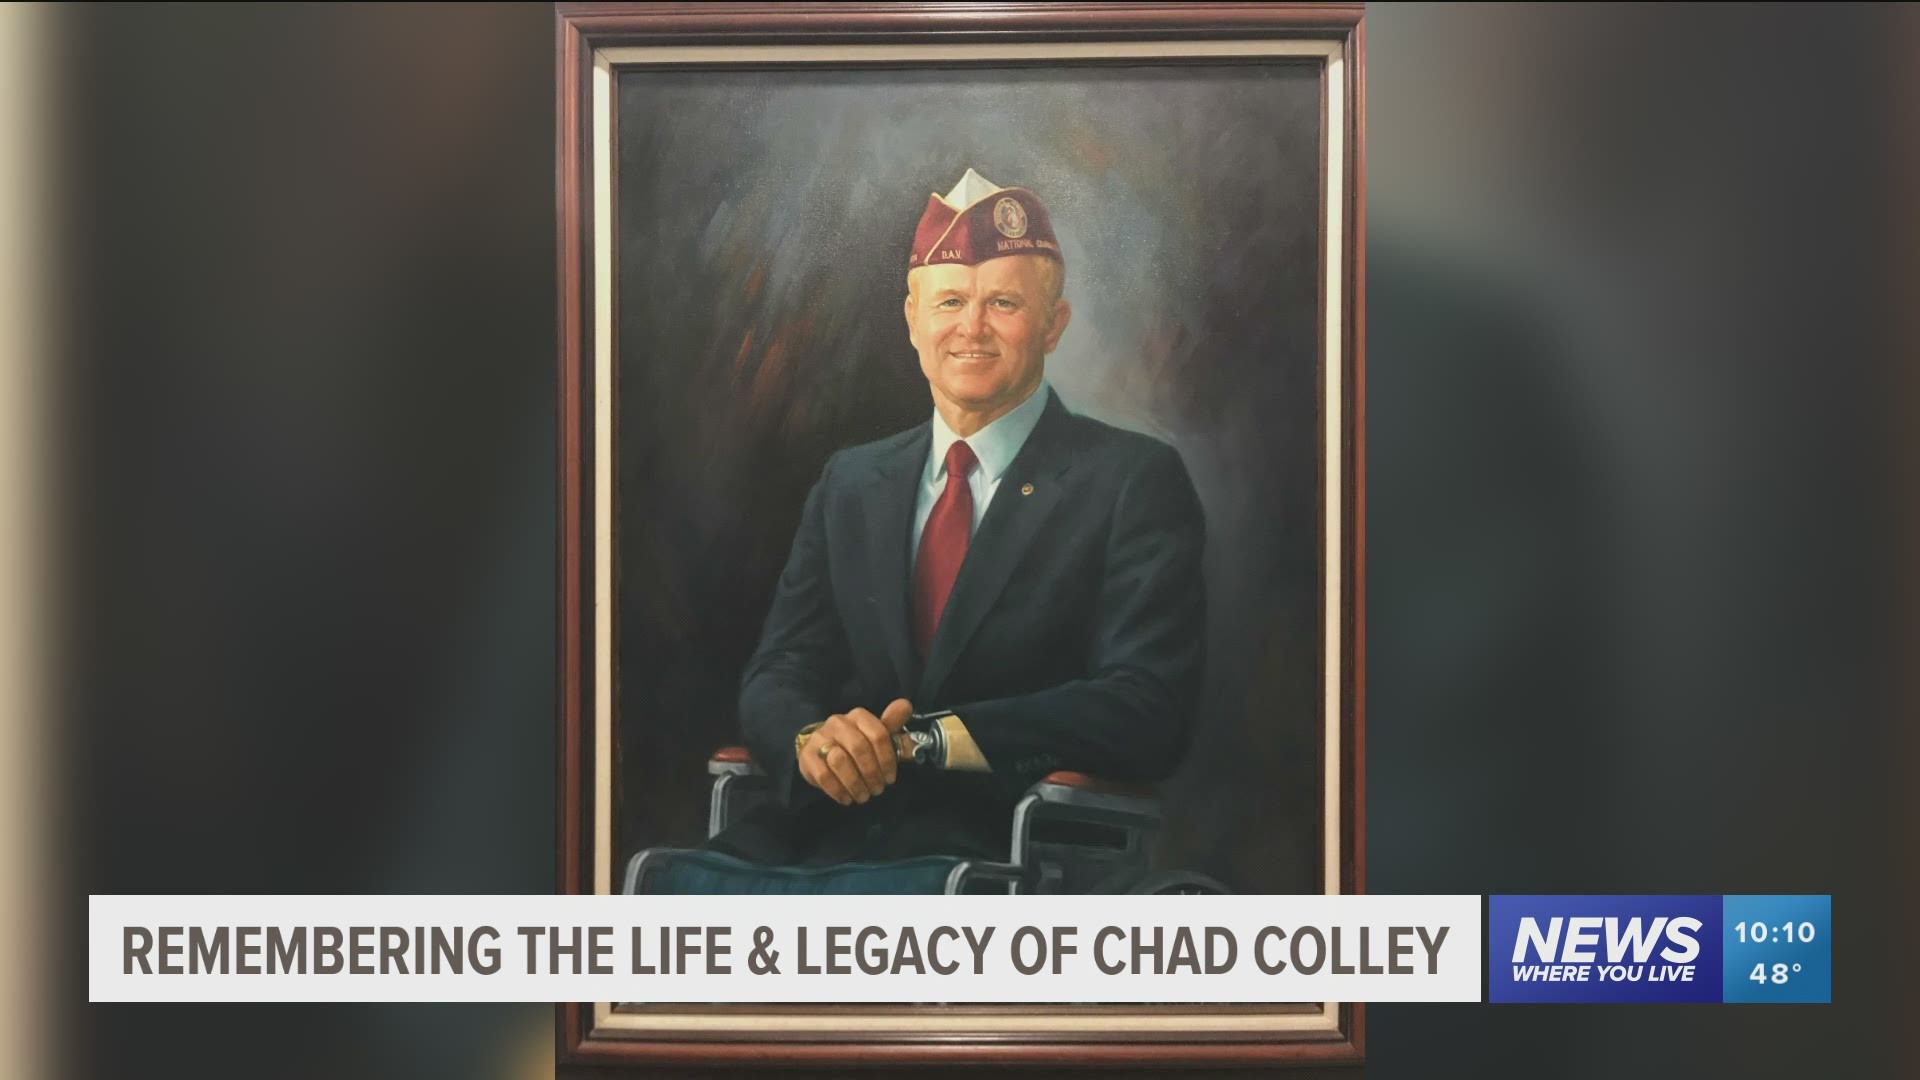 Chad Colley has been recognized nationally for his advocacy efforts for disabled veterans. He lost both legs and use of an arm in the Vietnam War.